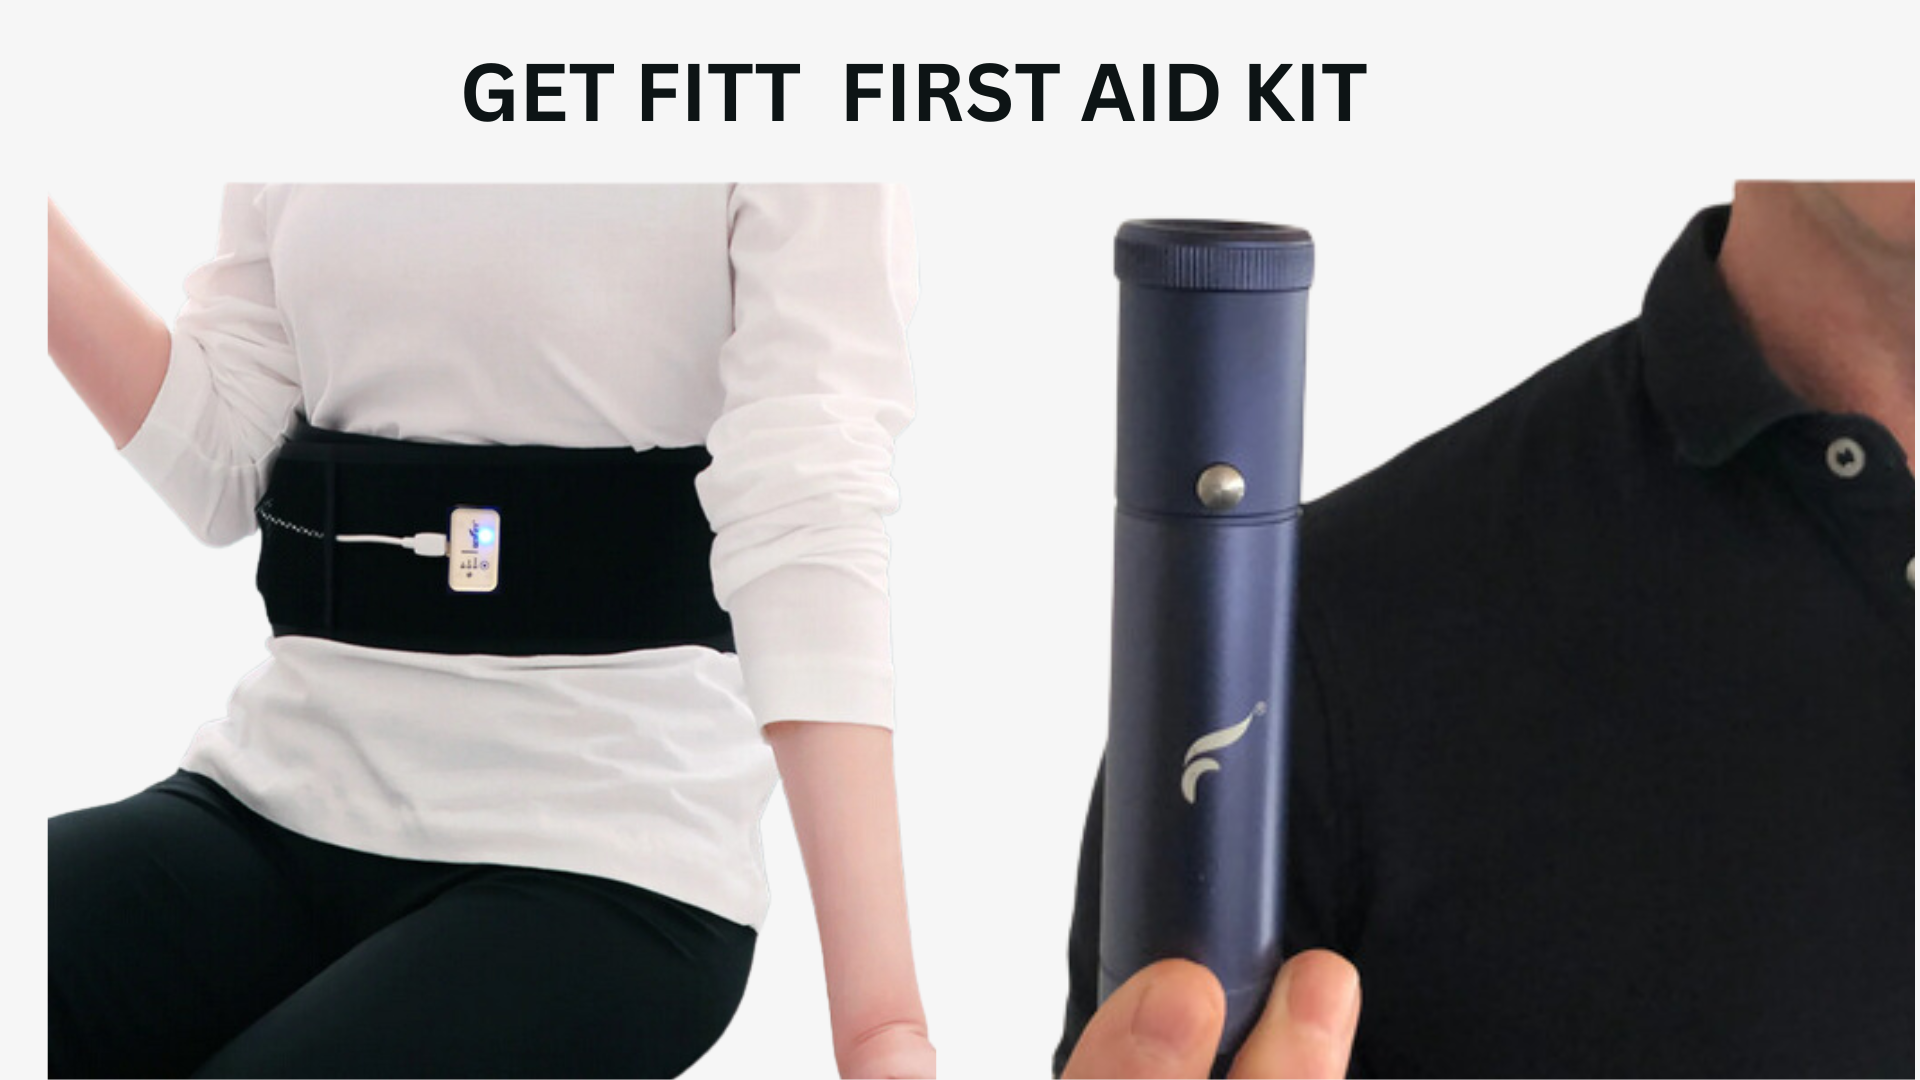 The First Aid Kit - The Blaze Body Wrap & Our Powerful Wonda LED Wand Kit - 5% OFF